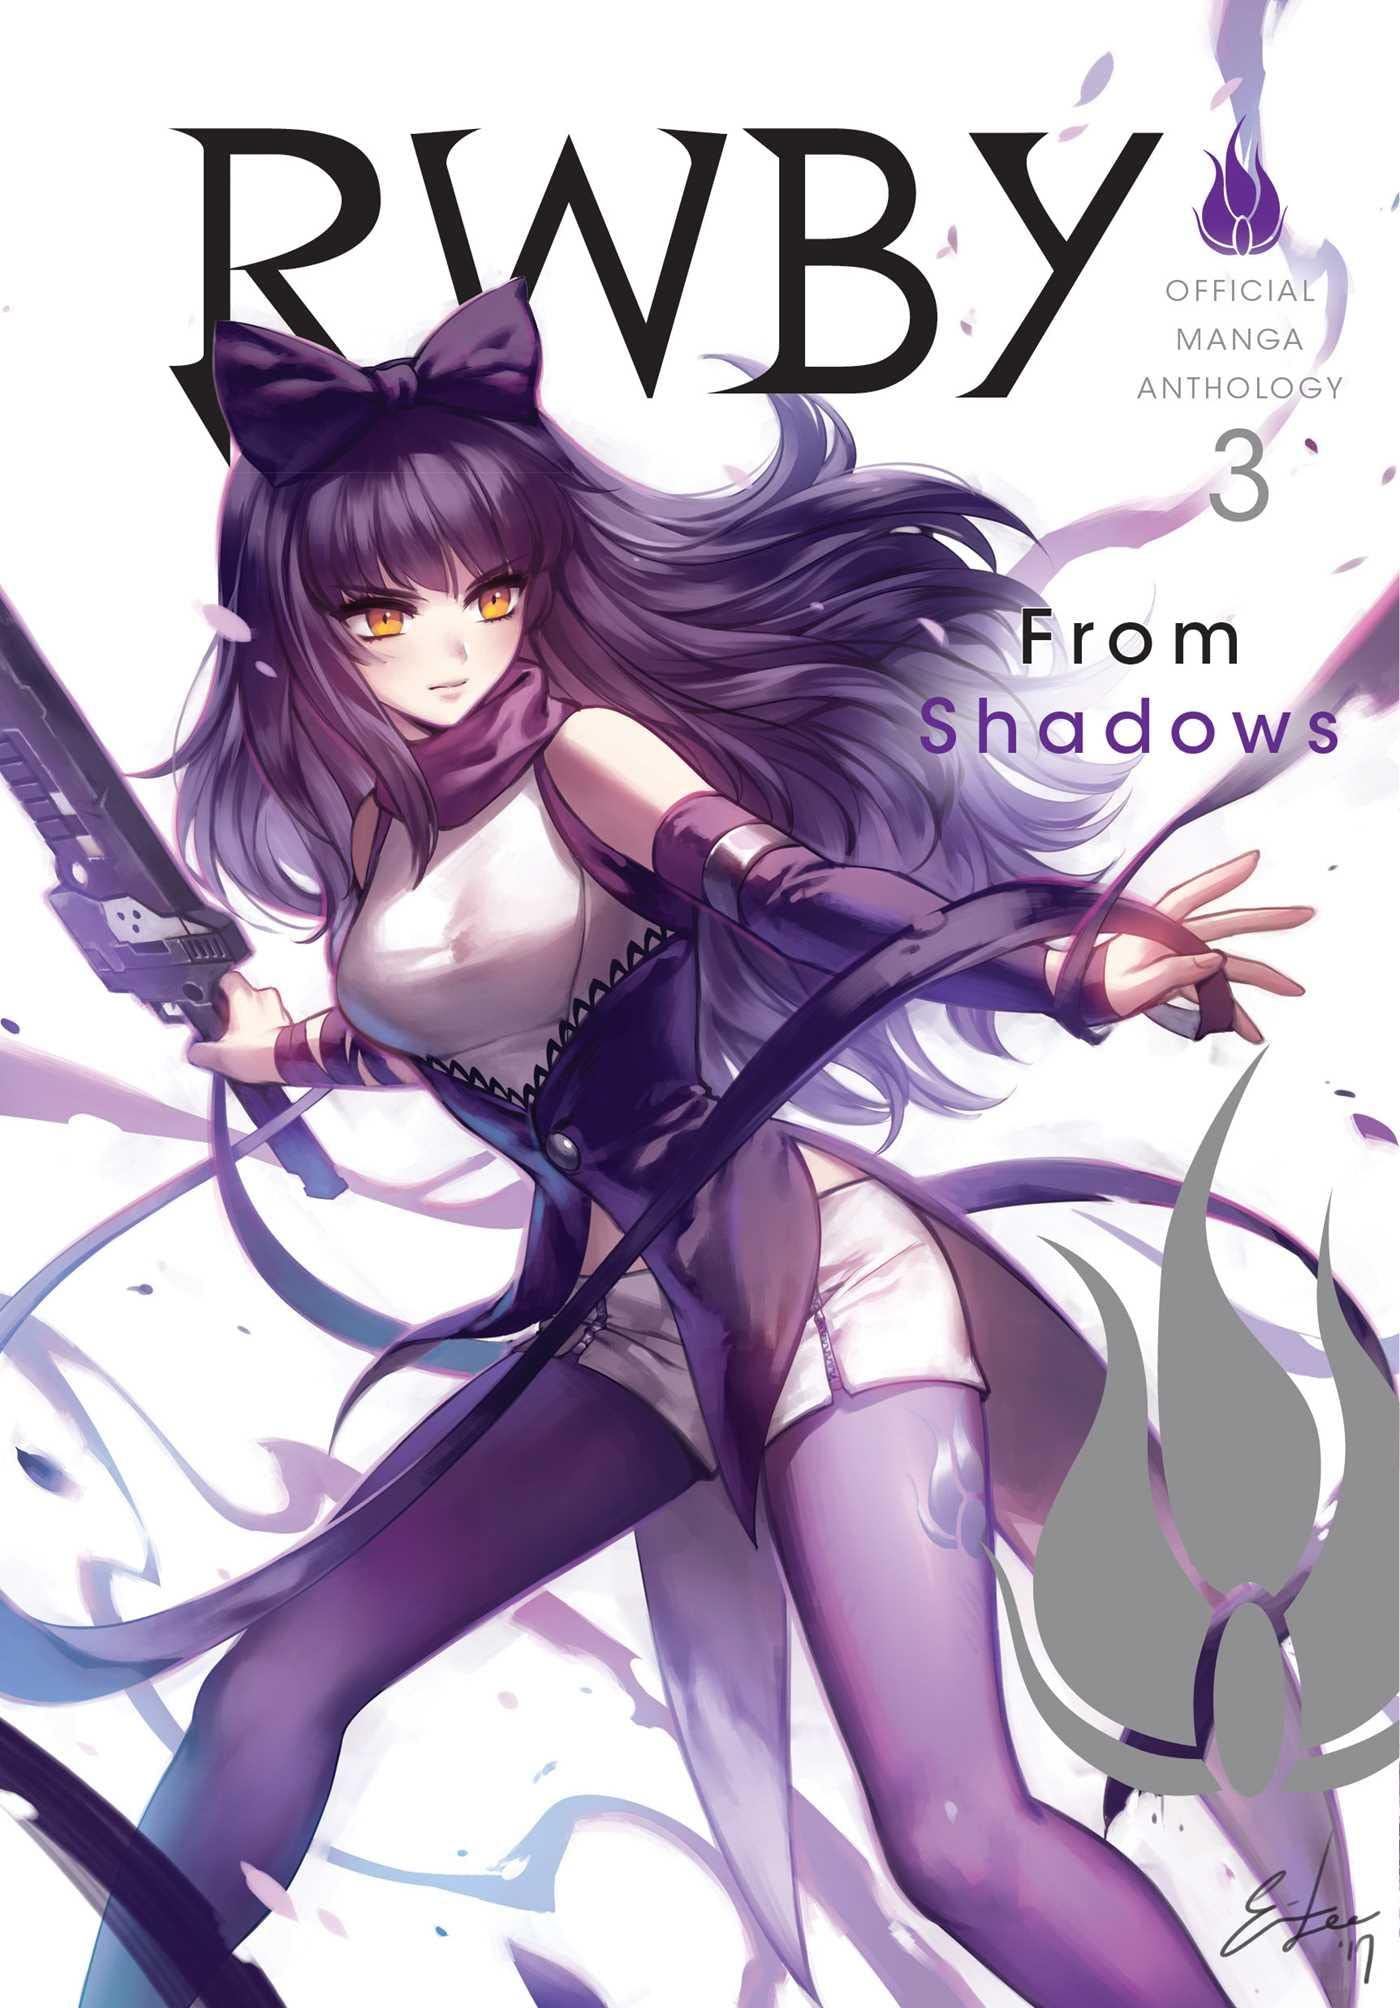 RWBY: Official Manga Anthology, Vol. 3: From Shadows (3)